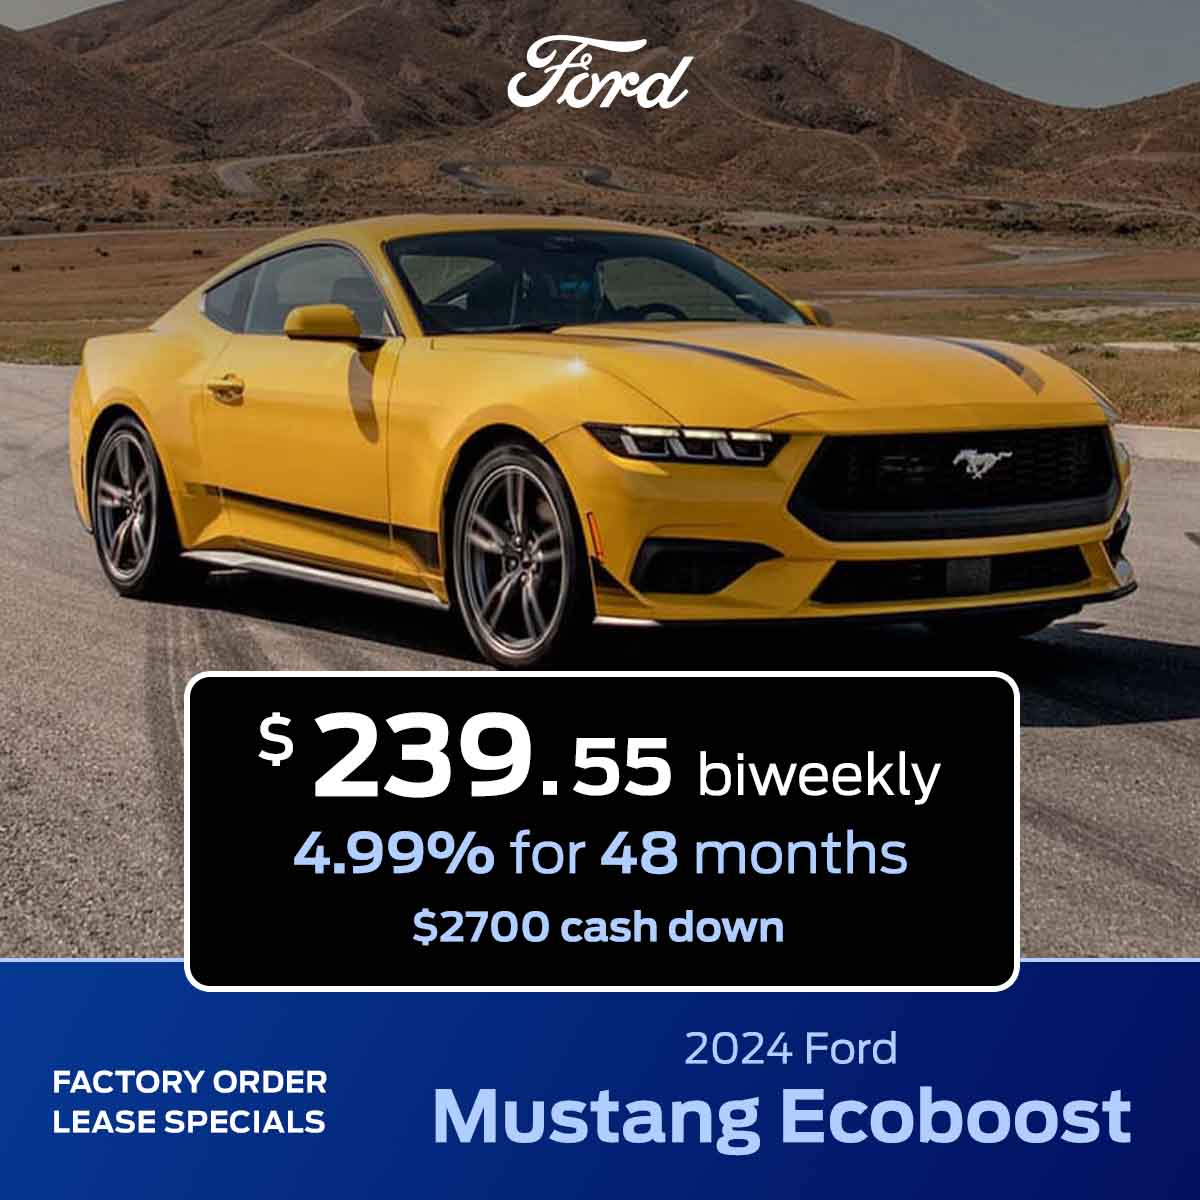 Mustang Ecoboost Ford Lease Special